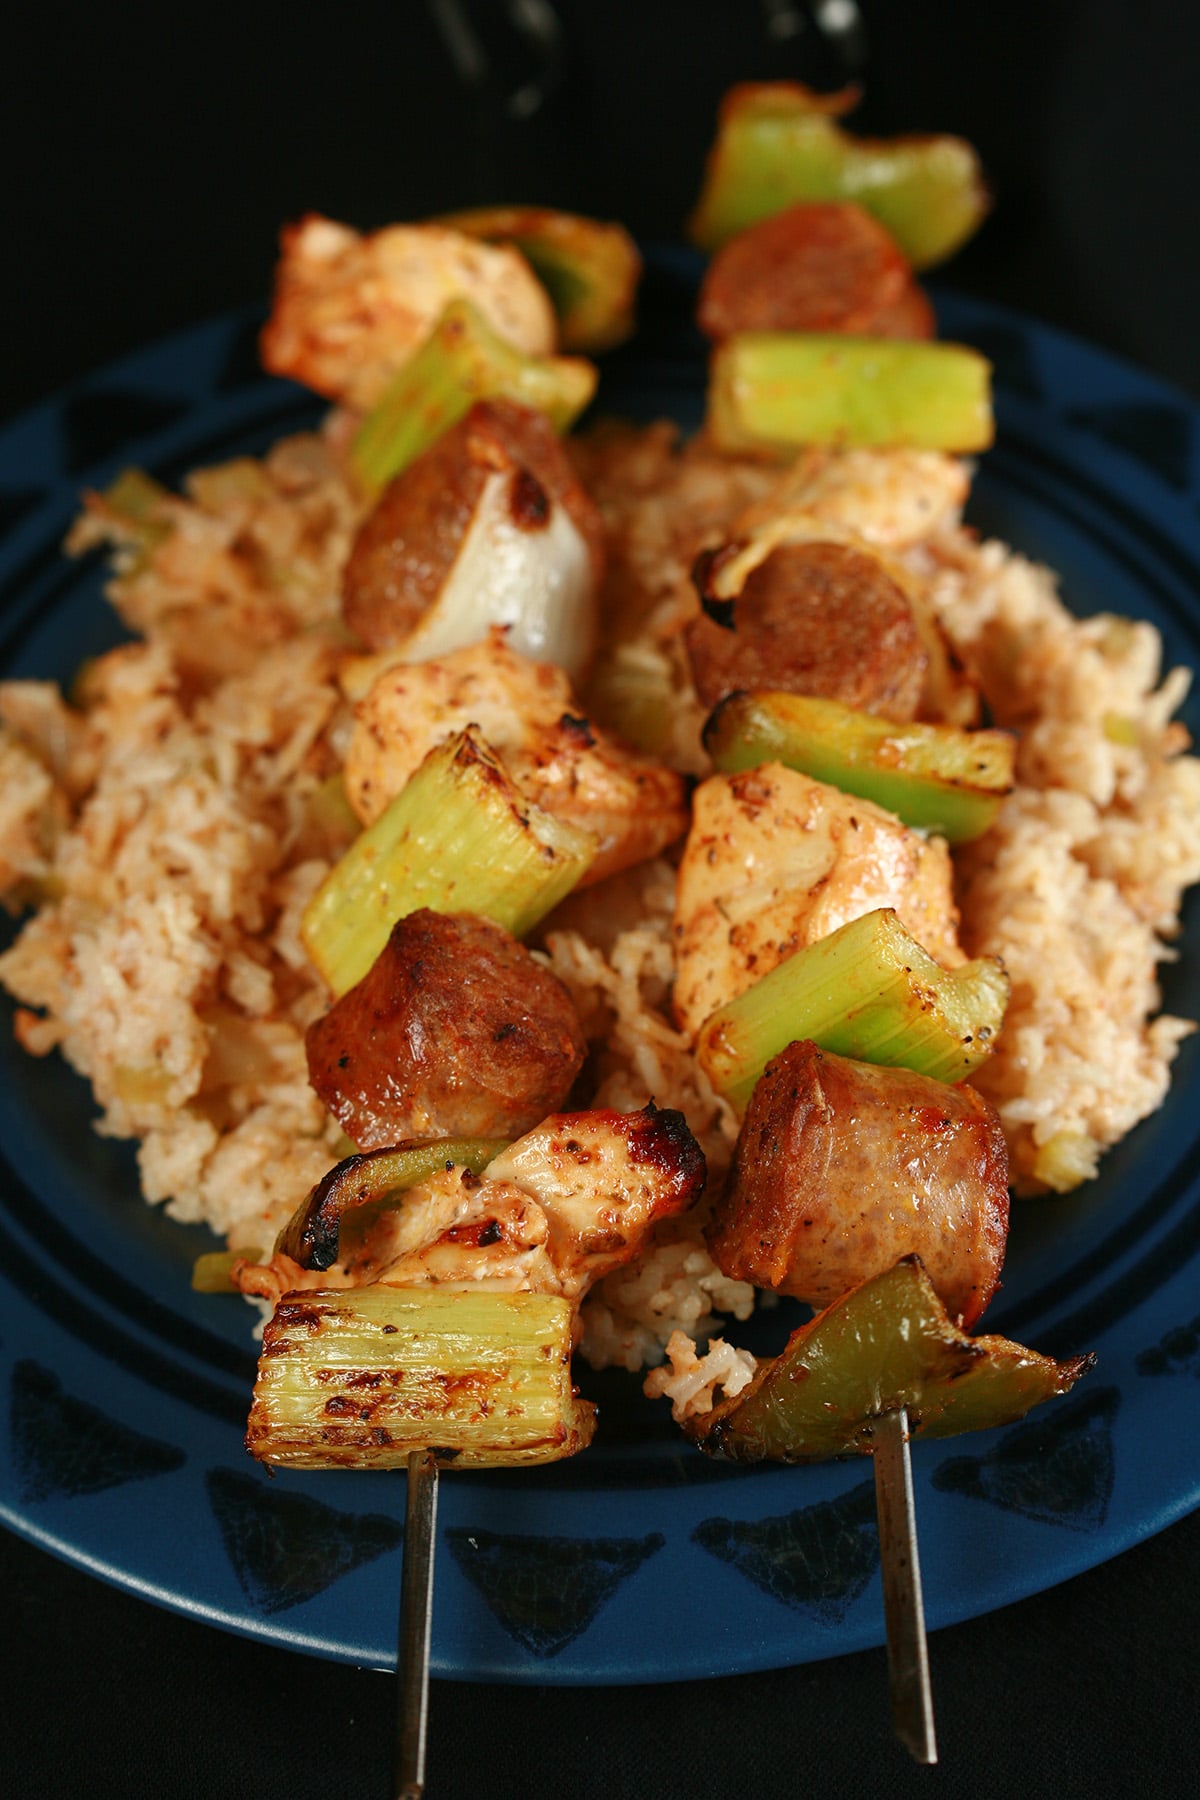 Two grilled jambayala skewers of chicken, sausage, green onions, onion, and celery on a bed of intensely seasoned "dirty" rice.